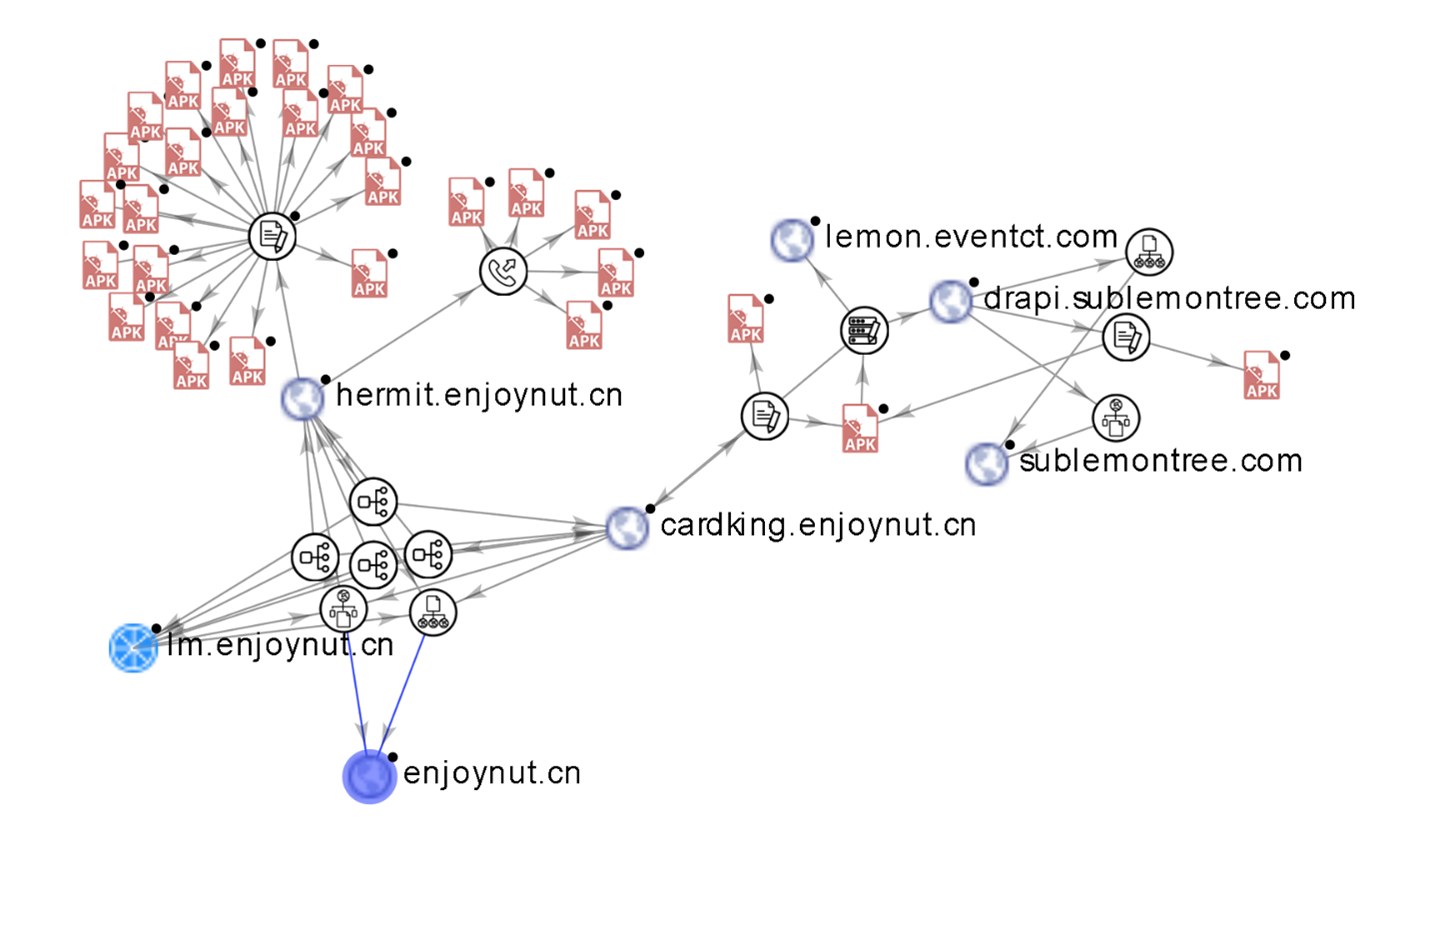 Figure 3. Pivoting through artifacts using a Velocity-Time (VT) Graph